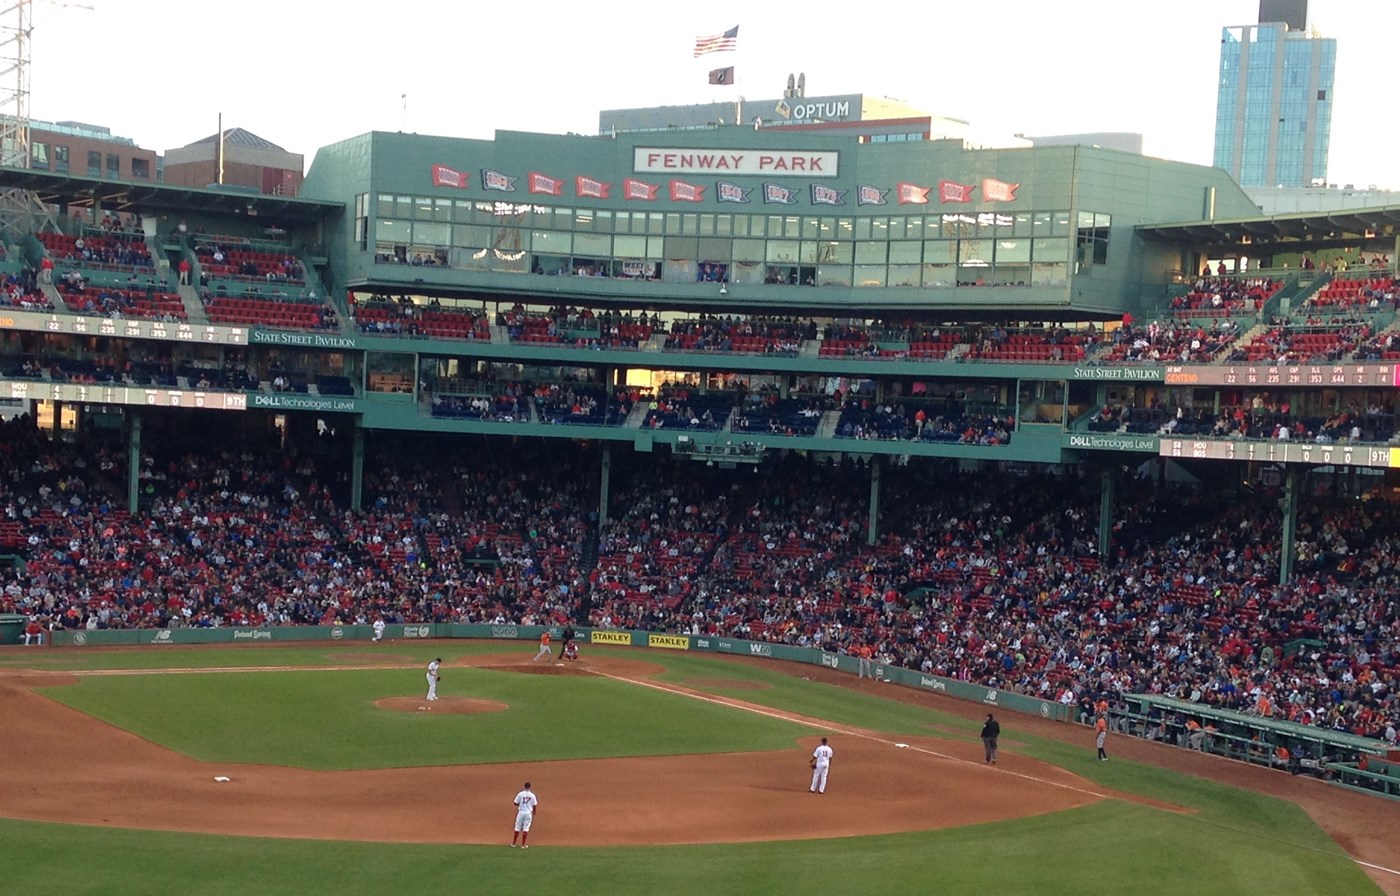 Fenway Park in Boston, Massachusetts during a Boston red Sox professional baseball game.